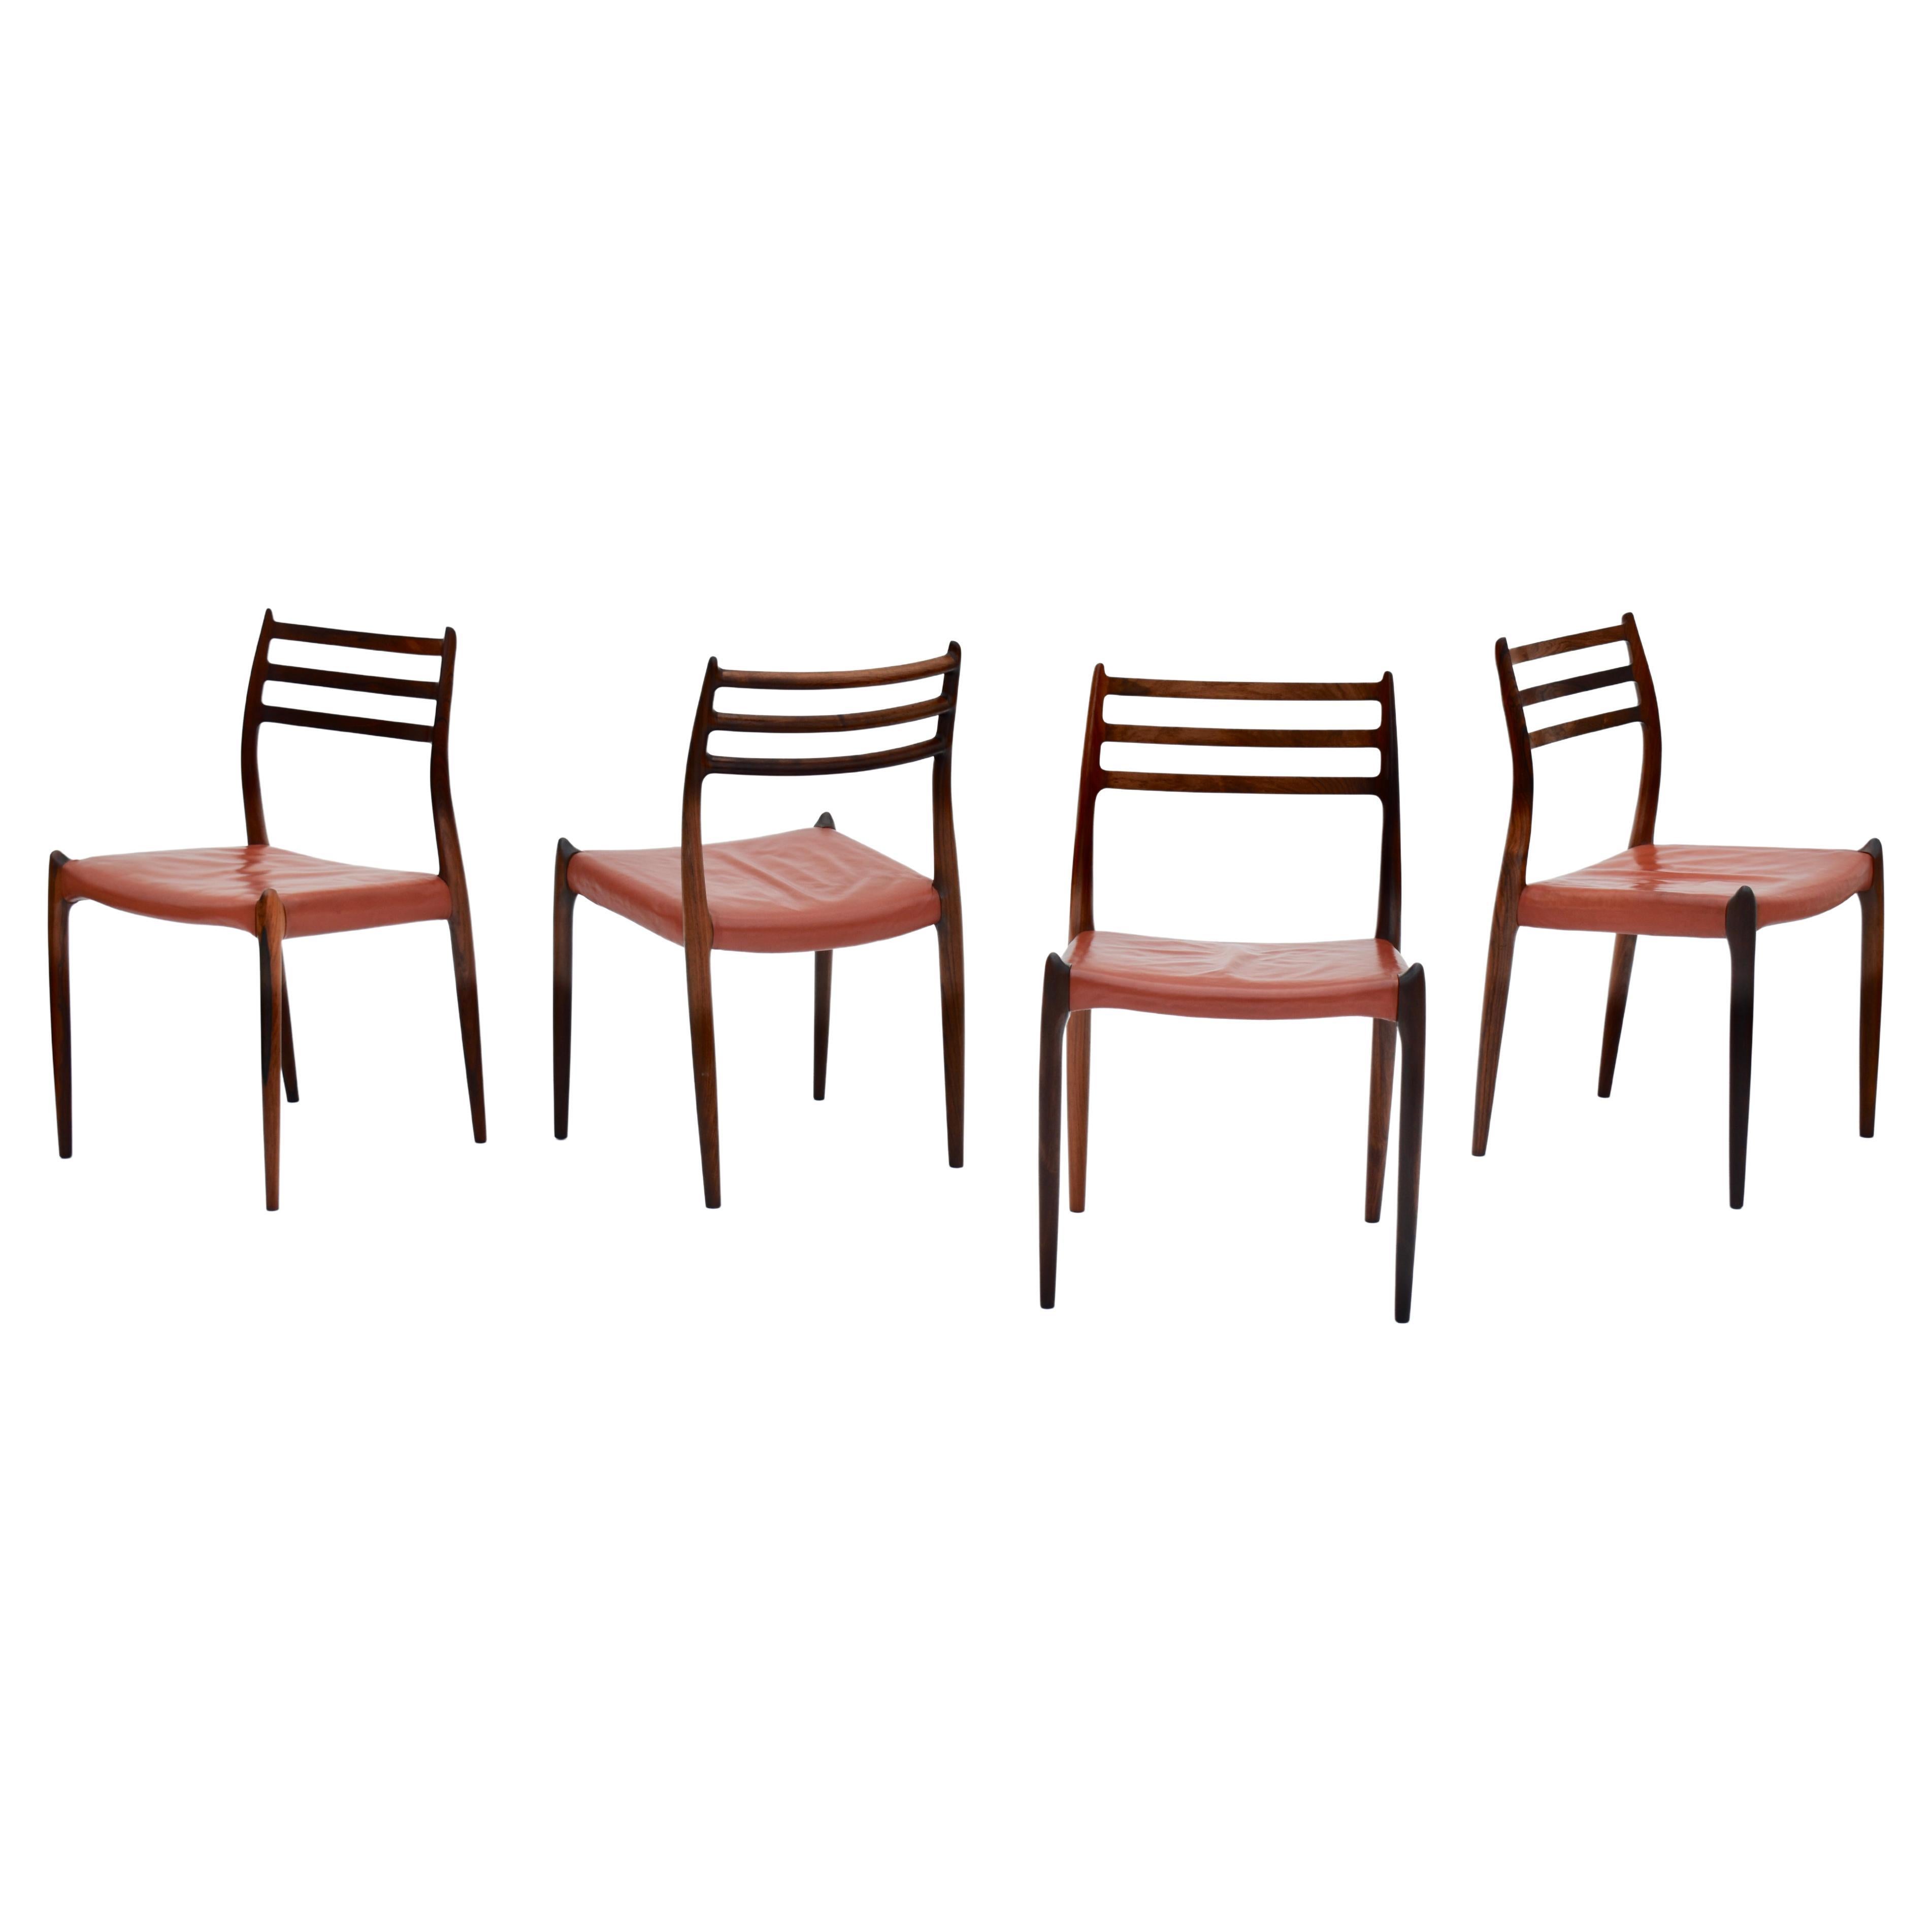 Set of Four Niels Moller Model 78 Brazilian Rosewood Chairs, Original Leather